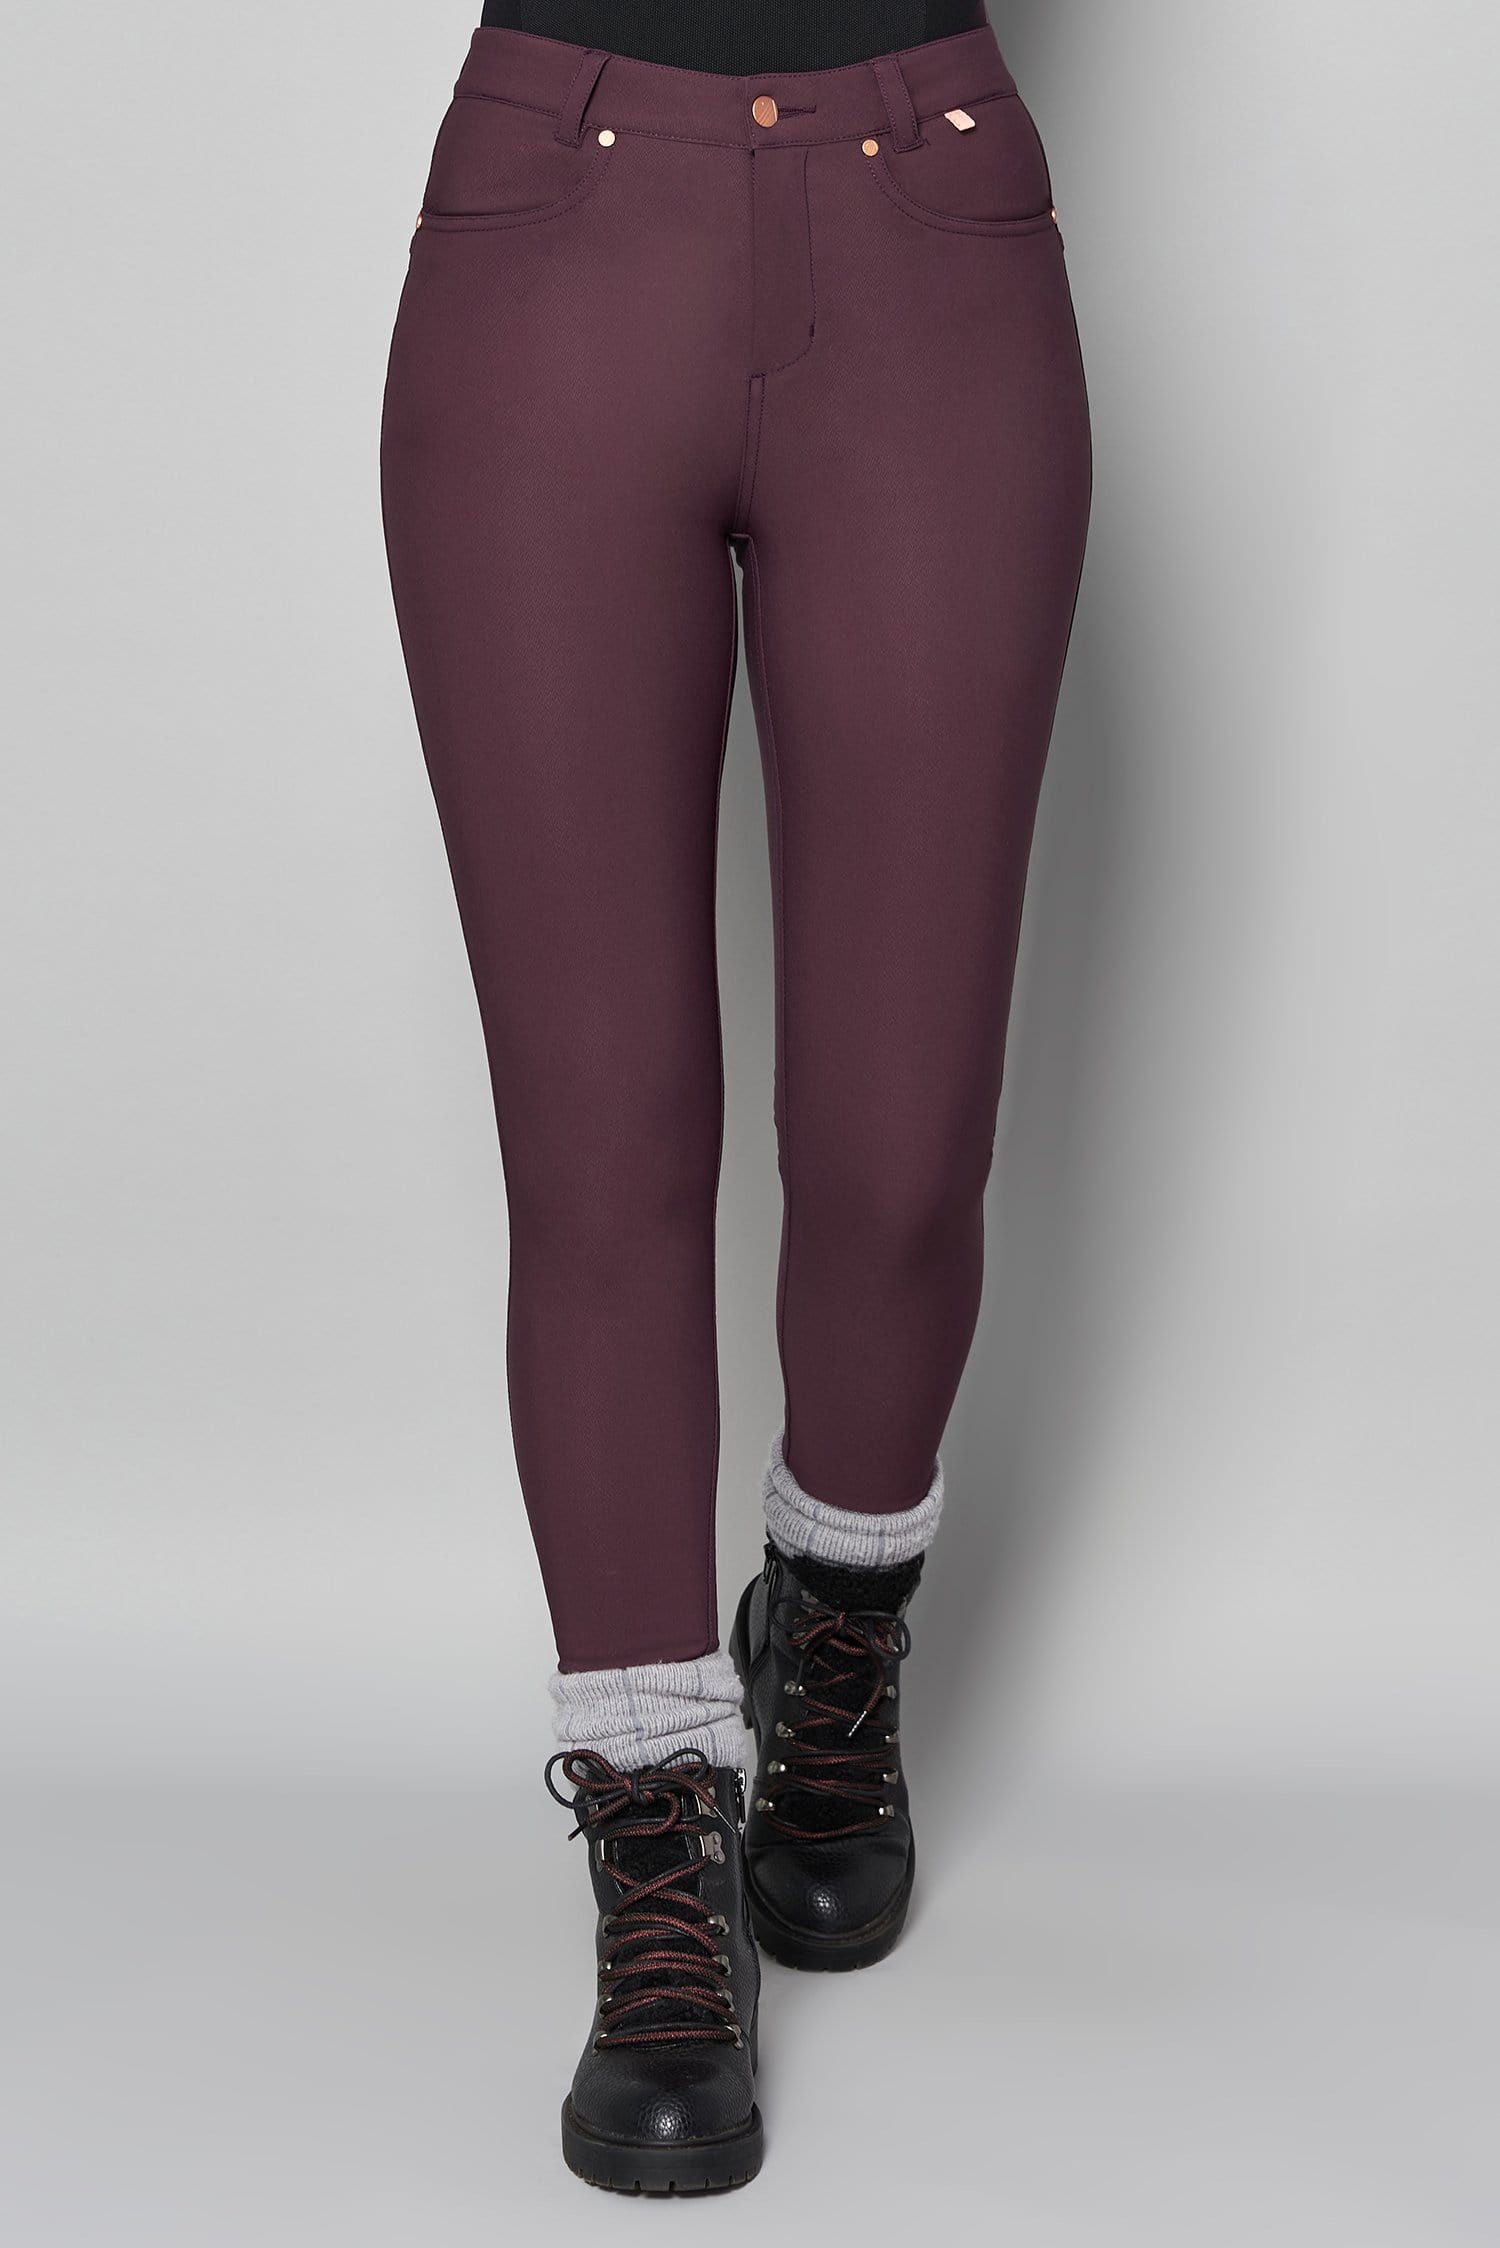 Thermal Skinny Outdoor Trousers - Aubergine - 40r / Uk22 - Womens - Acai Outdoorwear